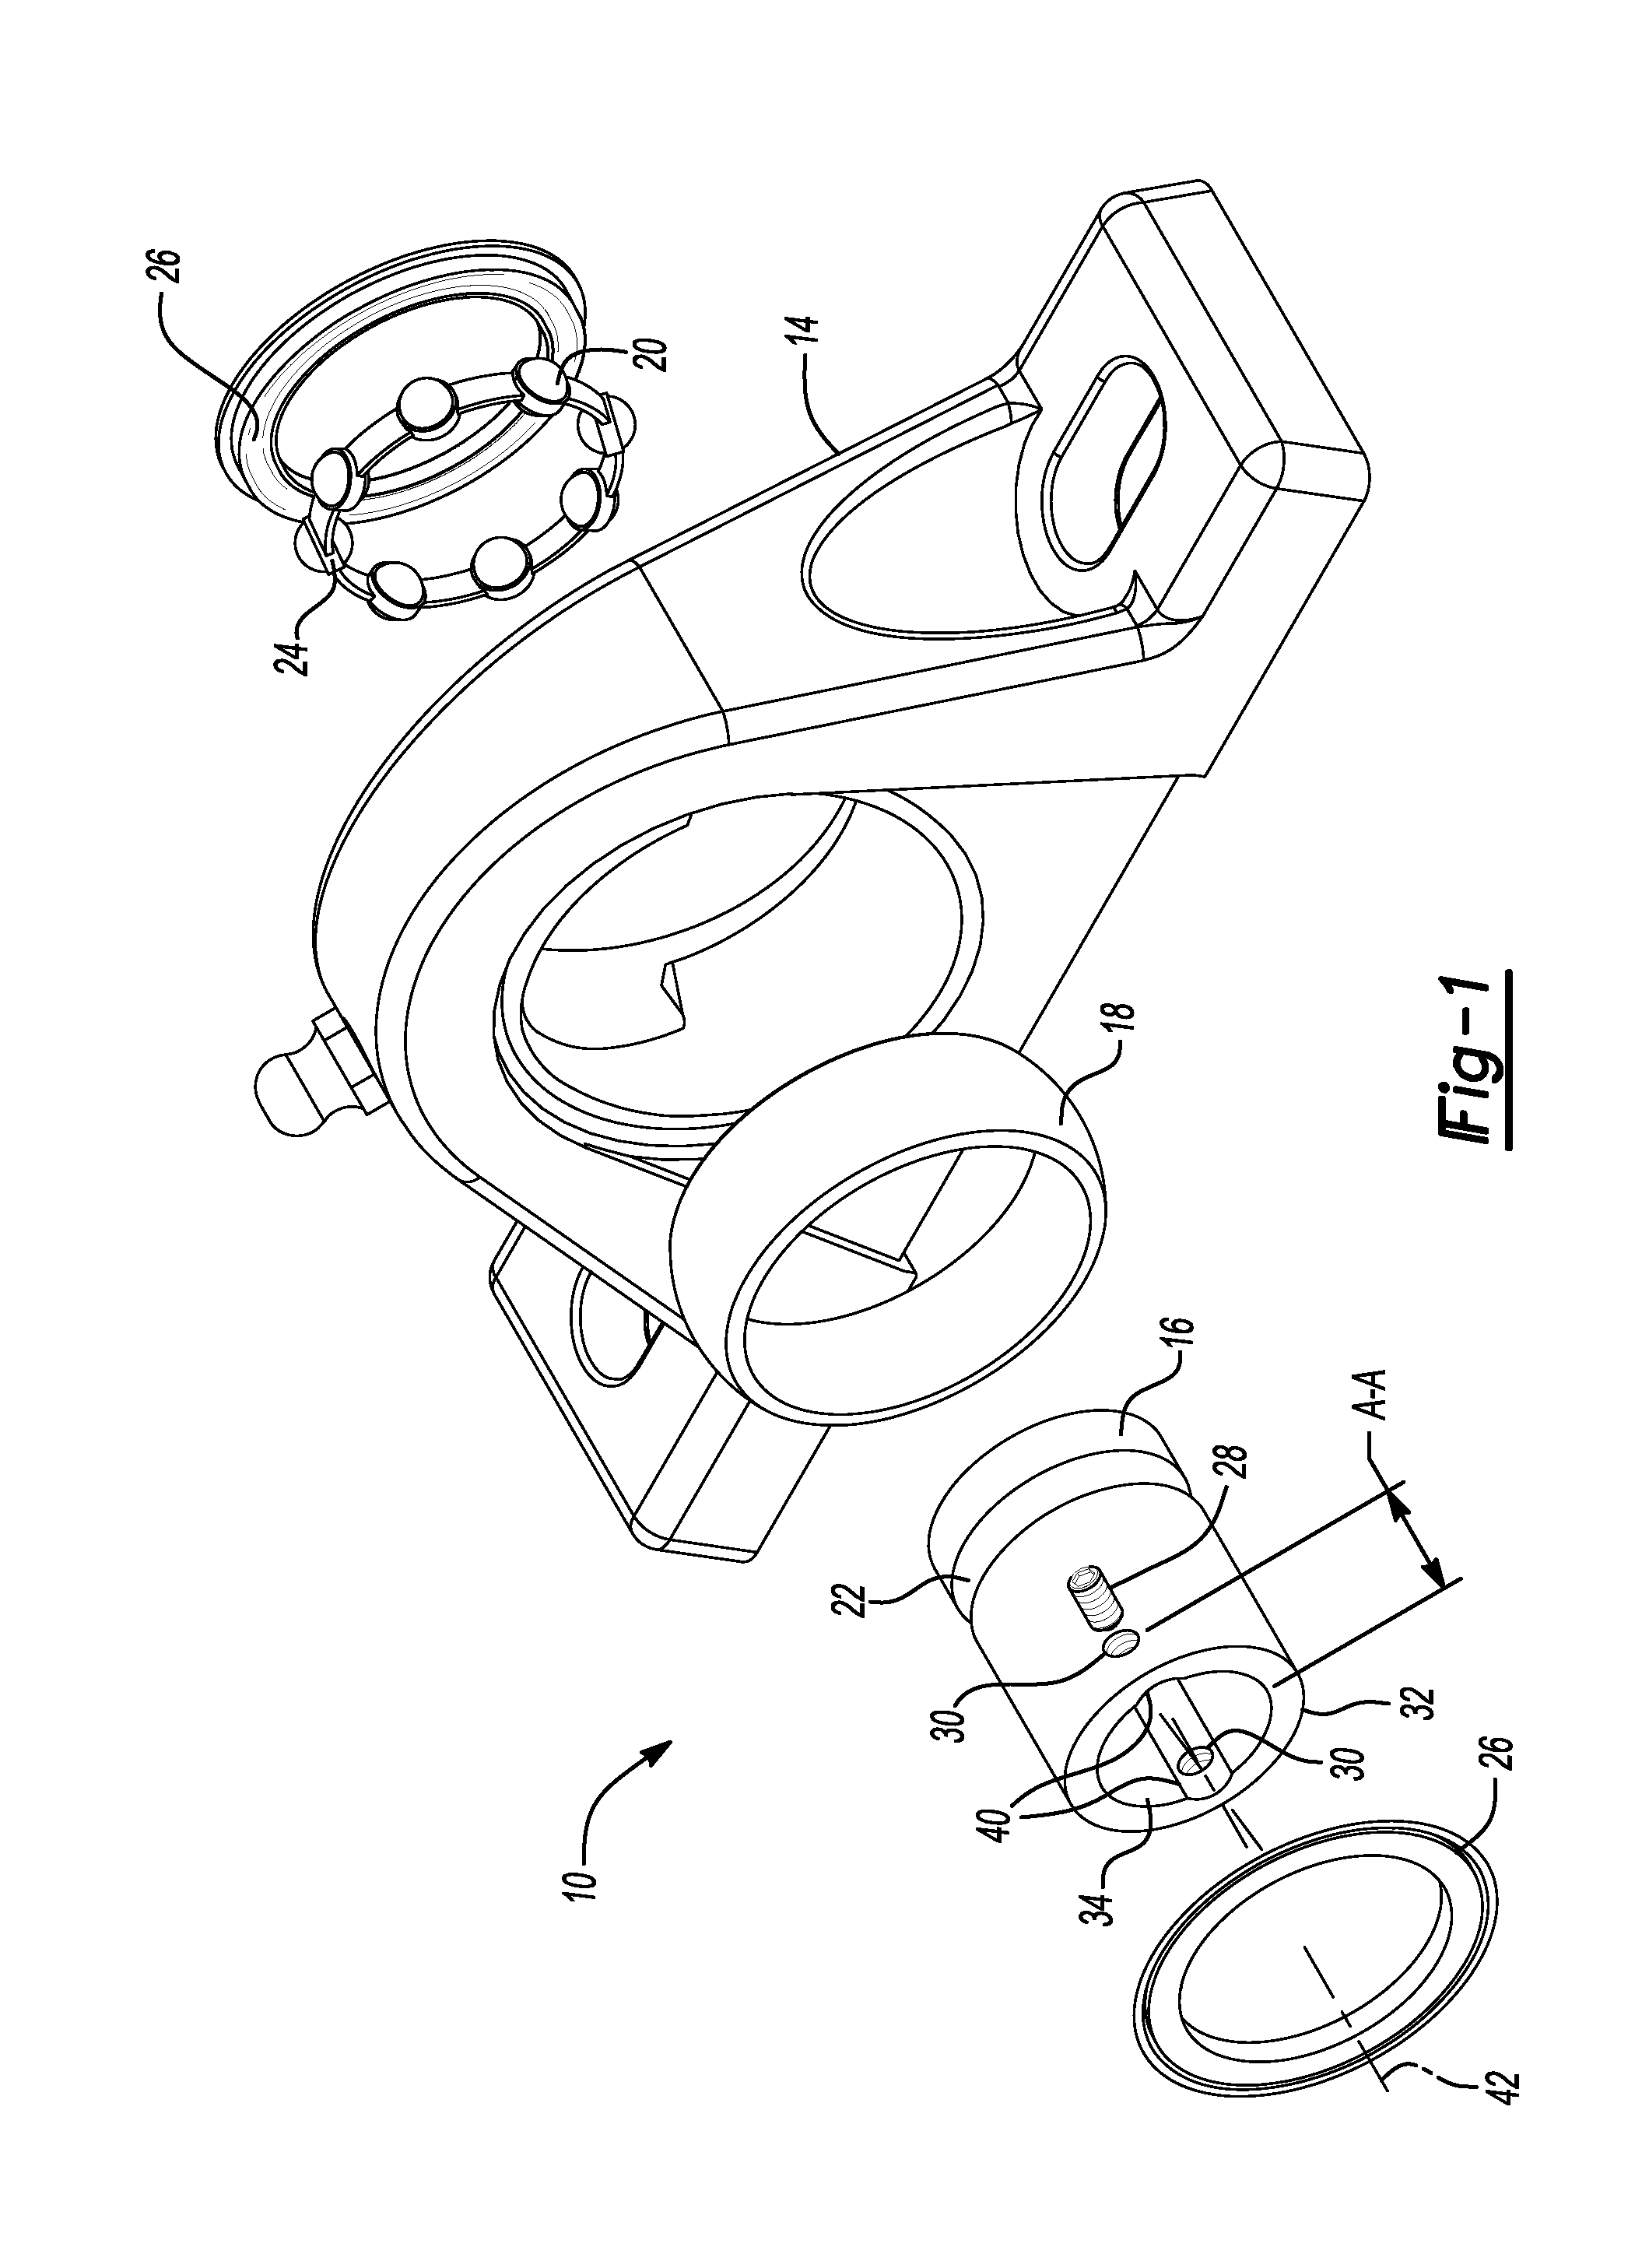 Burr resistant fastener-mounted bearing assembly